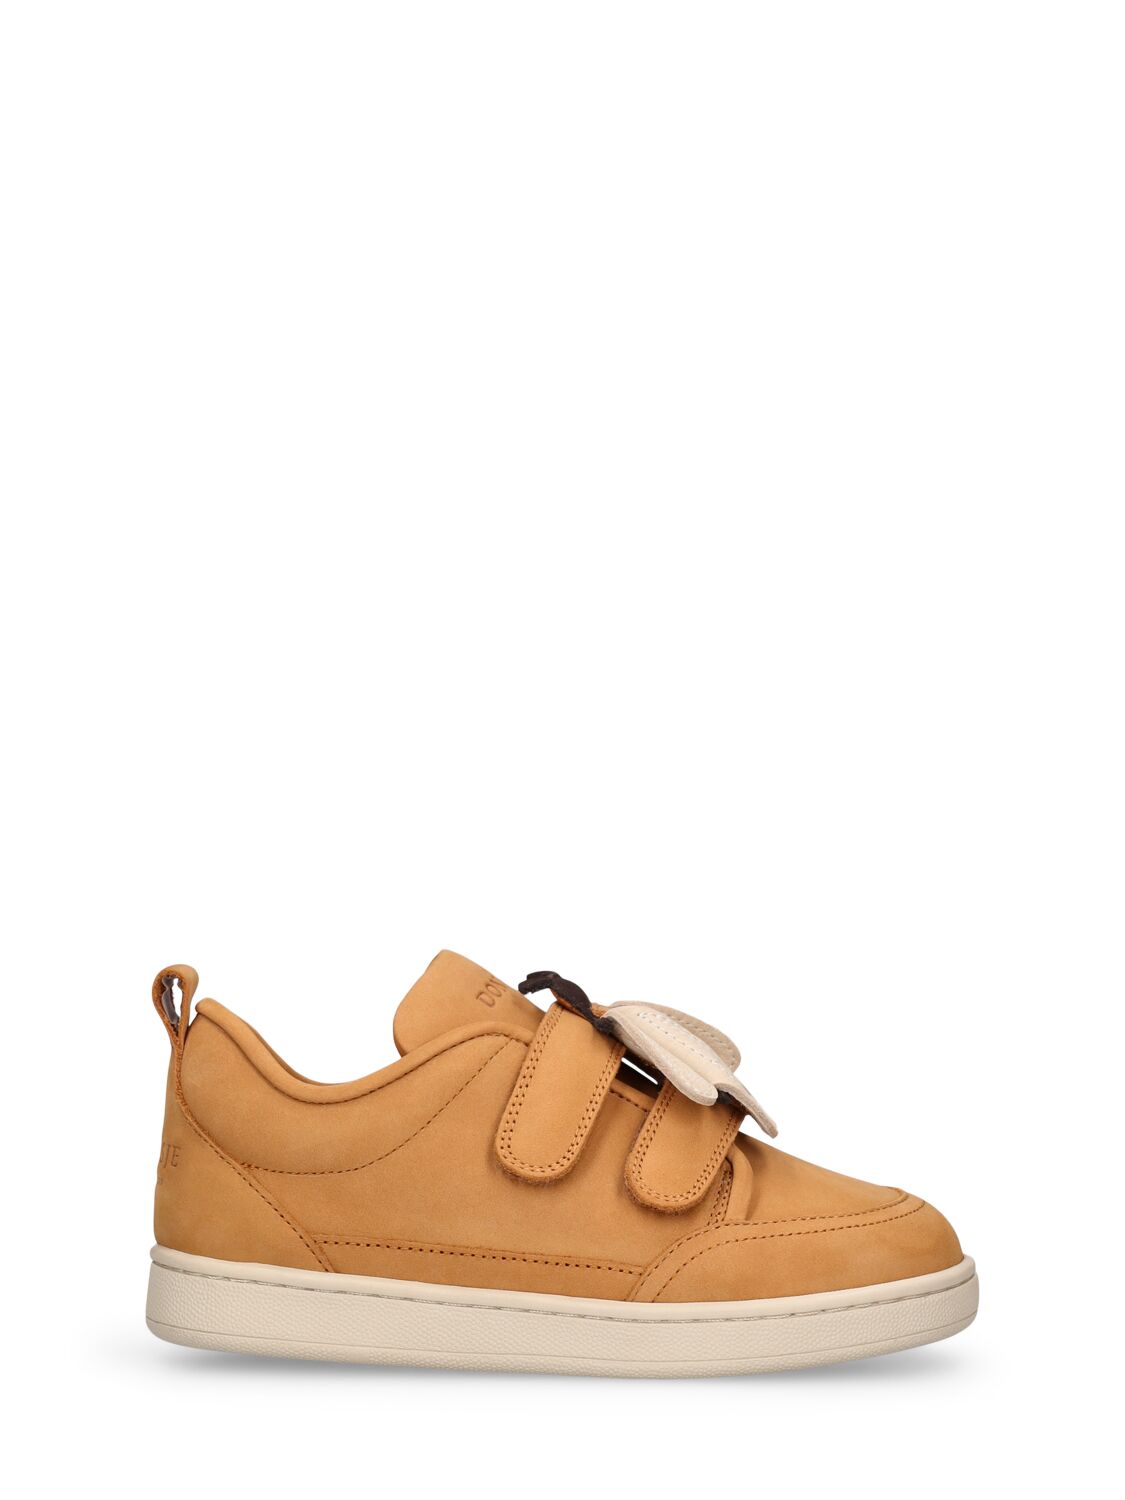 Donsje Kids' Leather Strap Trainers W/ Bee Patch In Brown